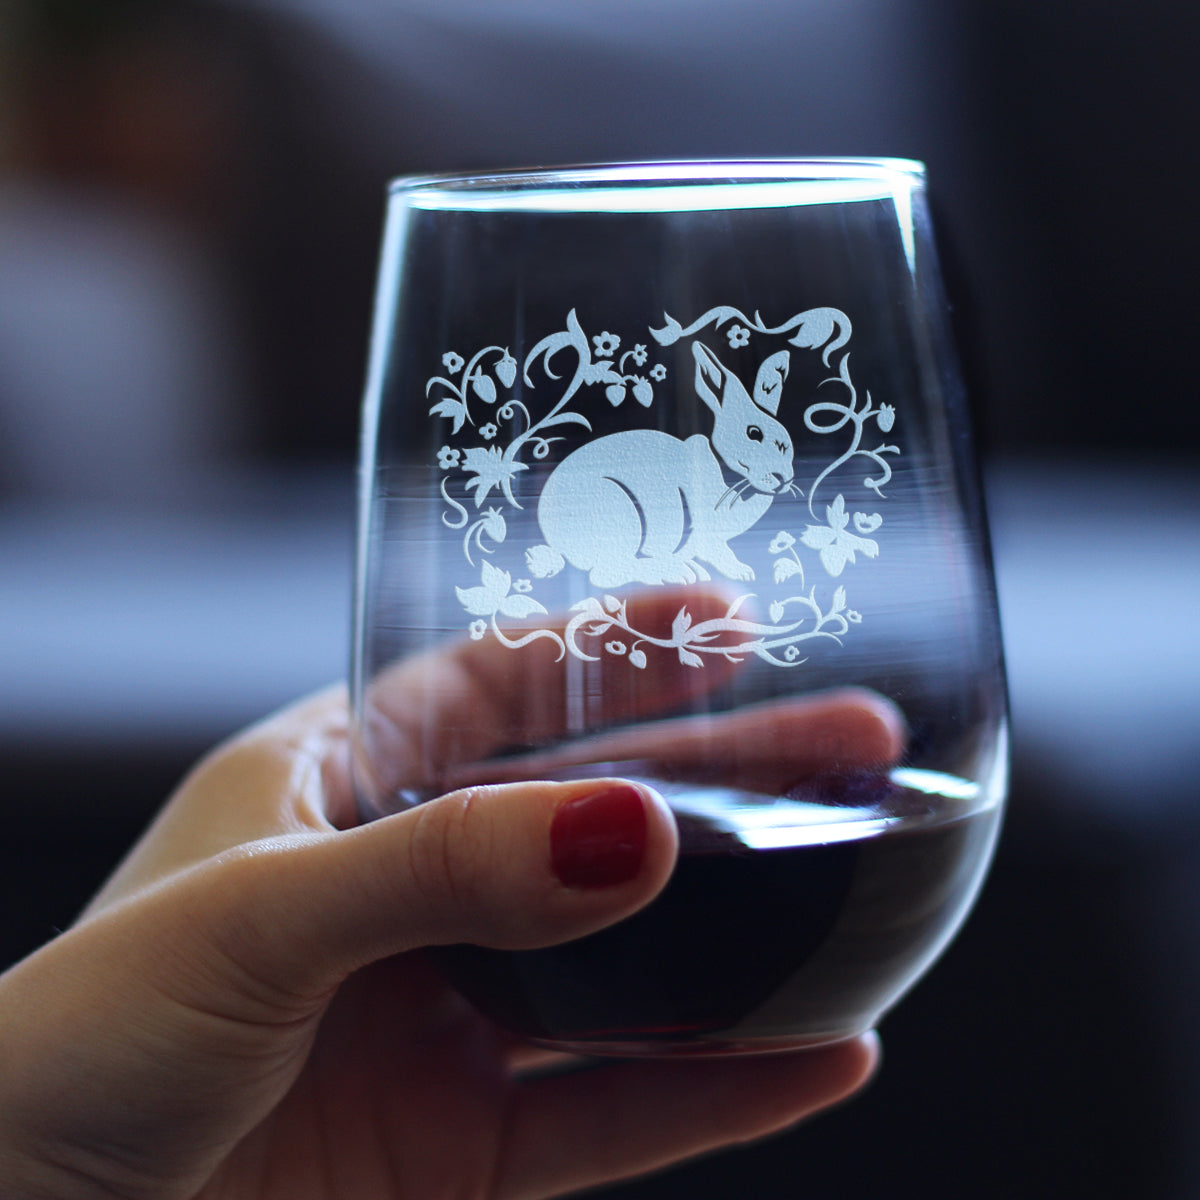 Berry Patch Bunny Rabbit - Stemless Wine Glass - Hand Engraved Gifts for Men &amp; Women That Love Bunnies